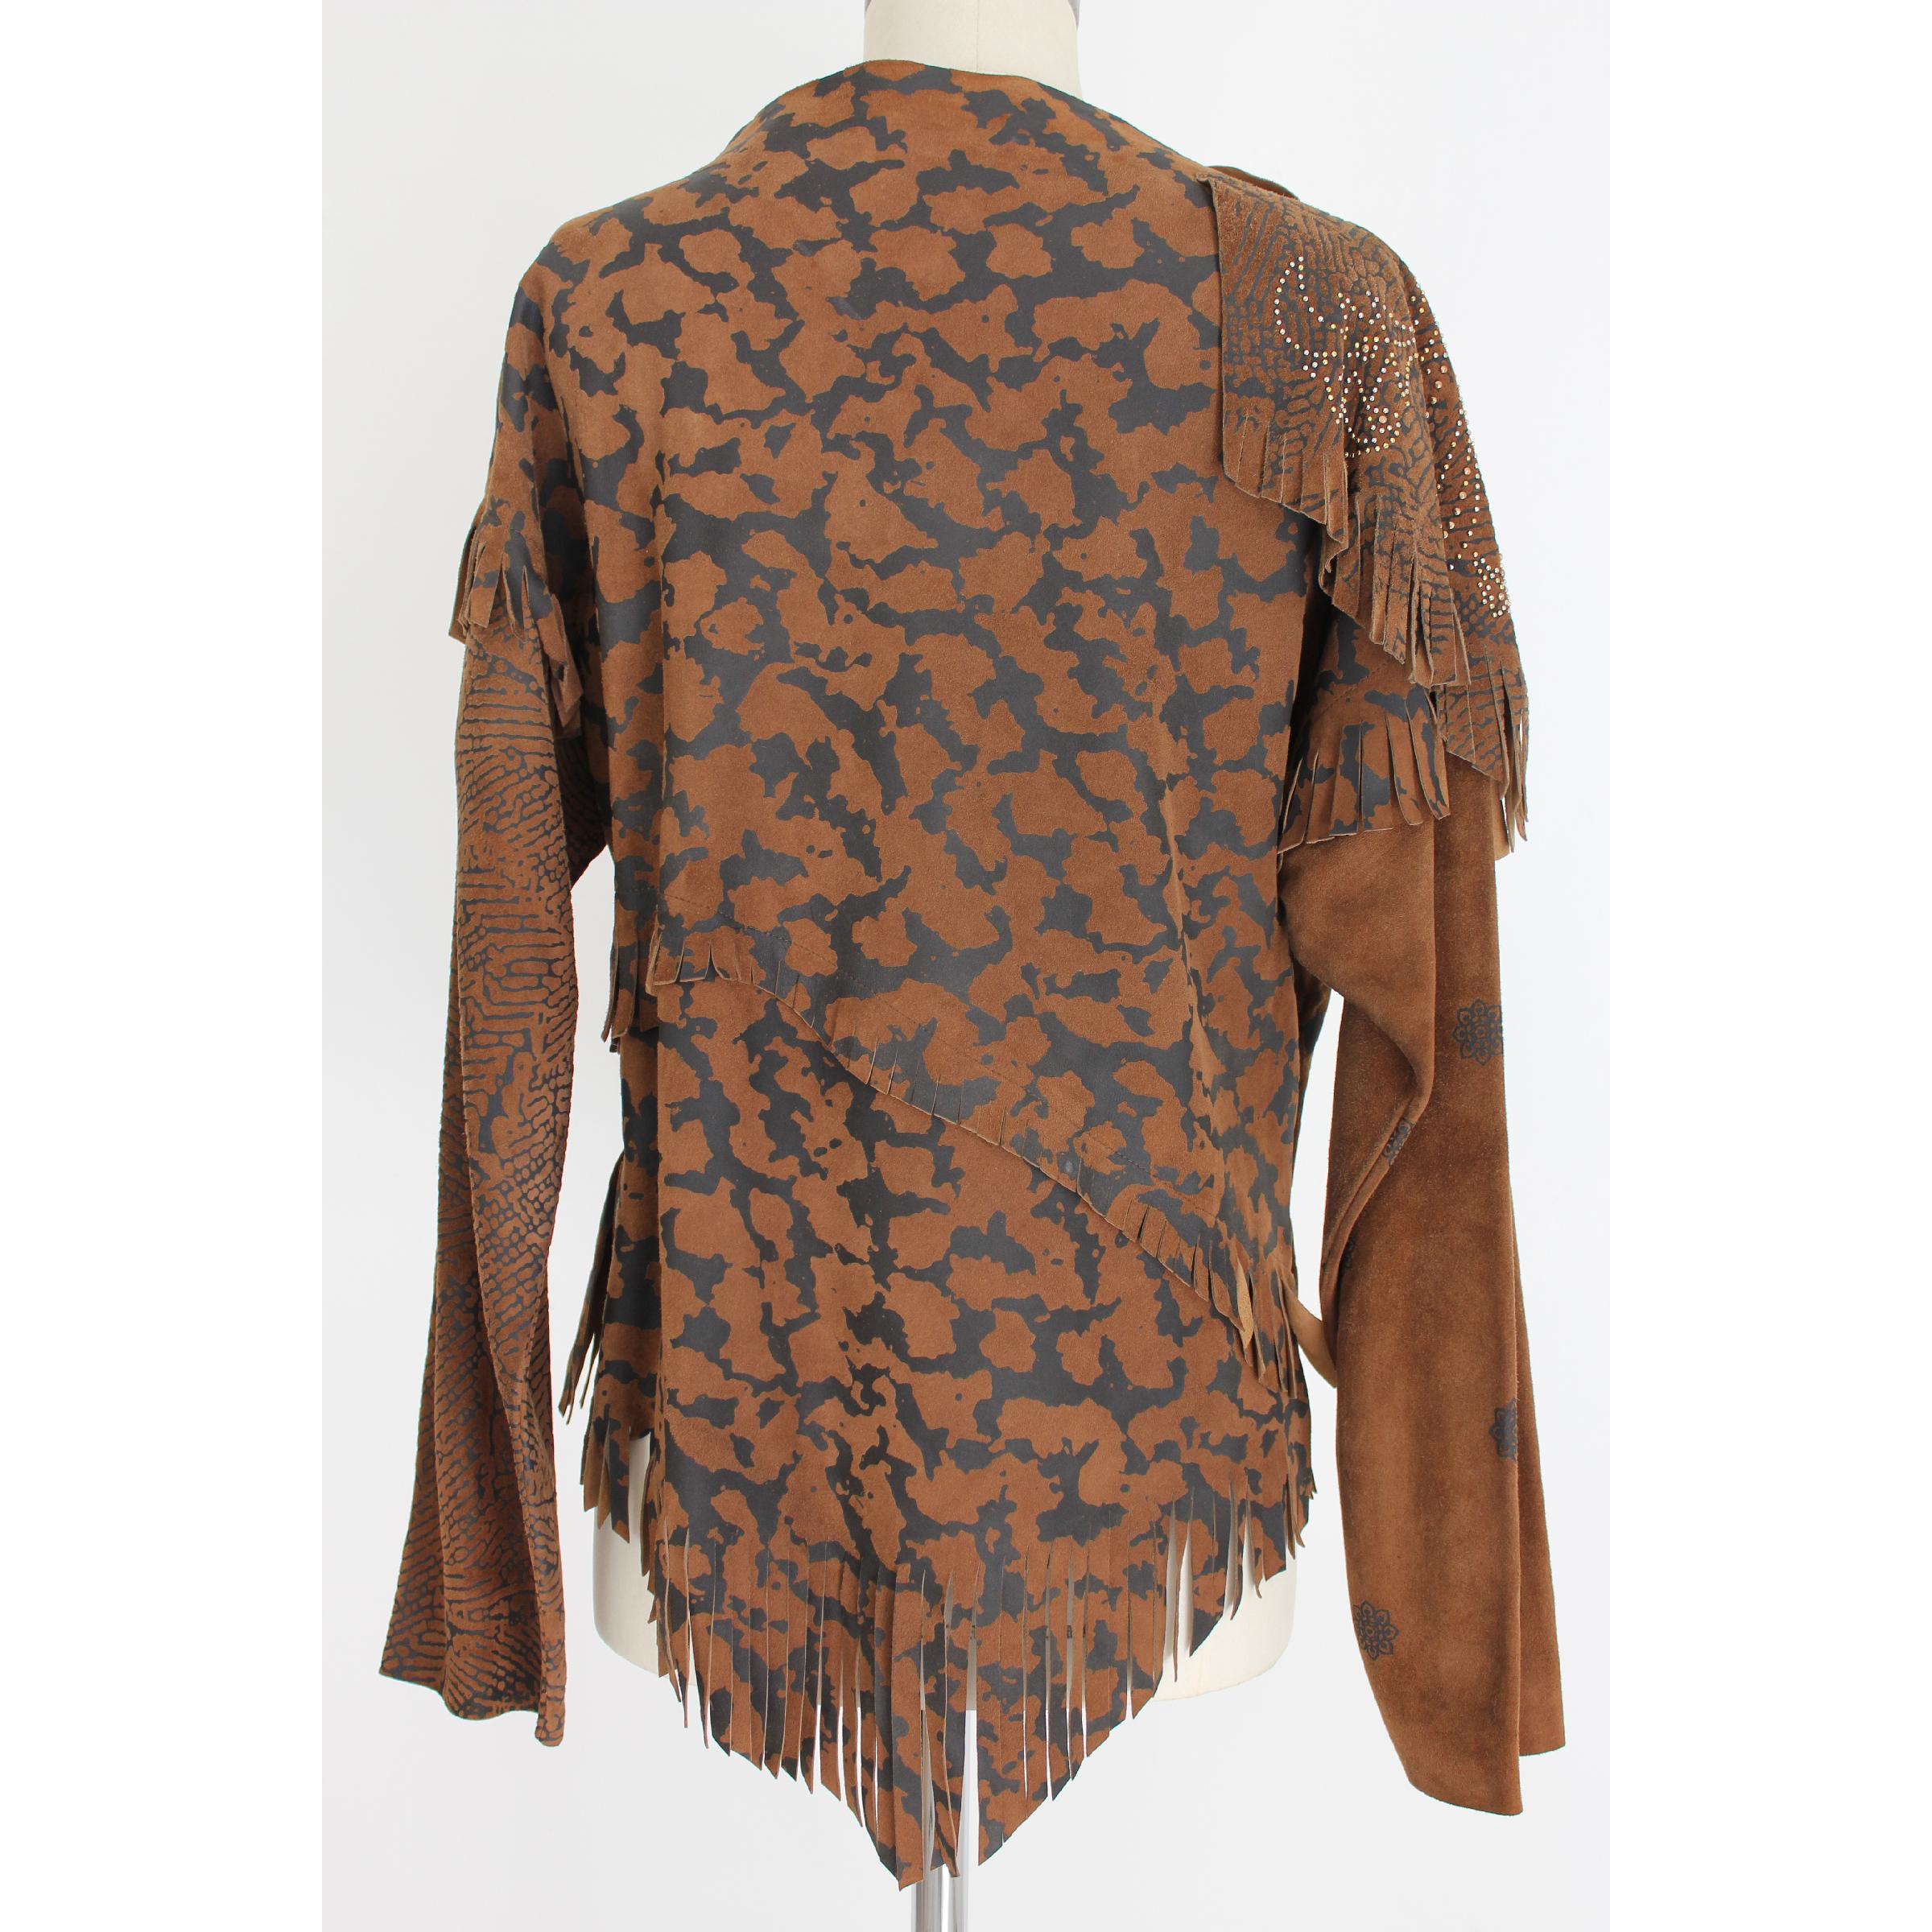 Vintage Pancaldi women's shirt. Brown, 100% sheep skin. Soft tunic model, boat neck, fringes and applications on the shoulders, spotted print, country style. 90s. Made in Italy. New without label.

Size: 42 It 8 Us 10 Uk

Shoulder: 46 cm
Bust /